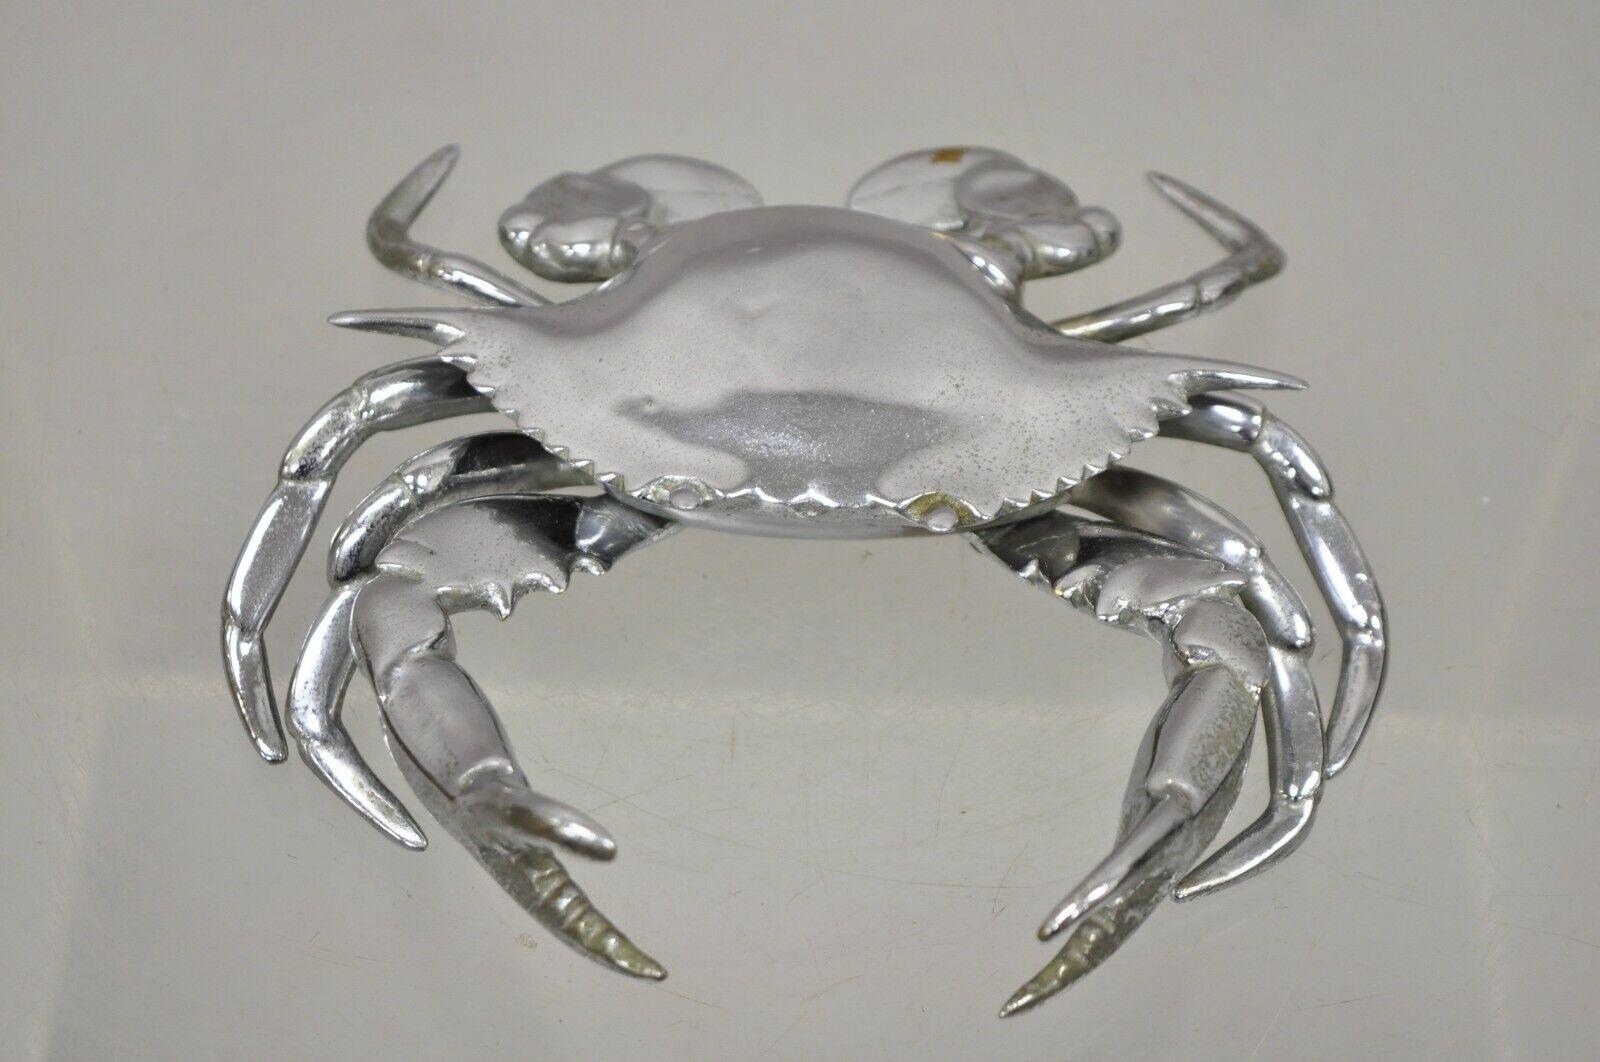 Vintage silver plated full crab figural inkwell holder caviar bowl. item featured is great for use as an inkwell or caviar/dip bowl. 
Circa mid-20th century. Measurements: 2.75